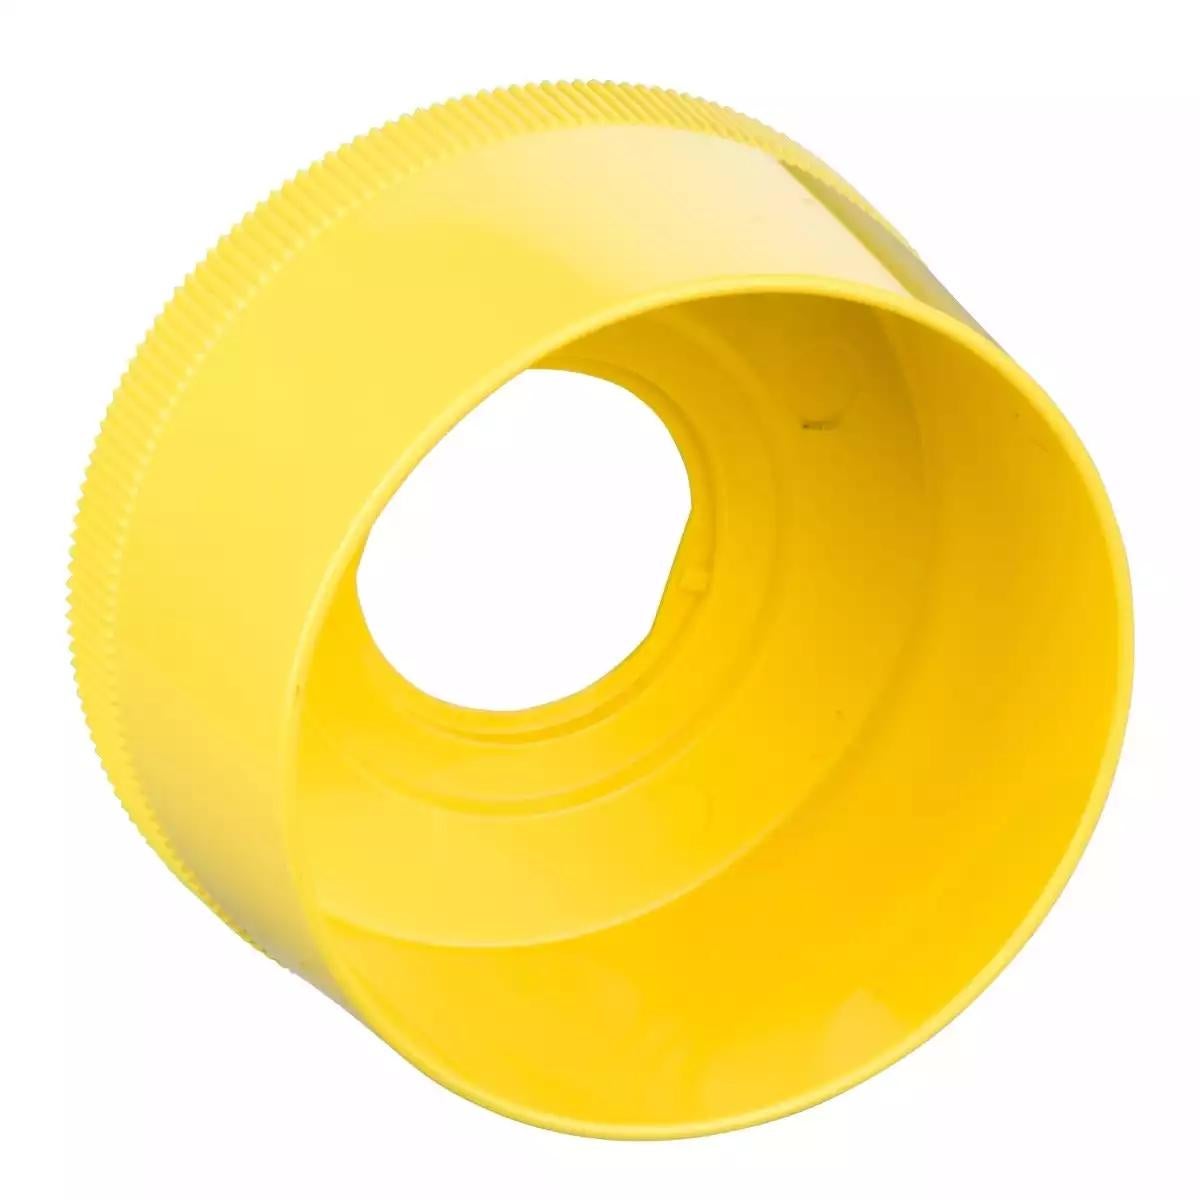 Round guard for 40mm Emergency stop, Harmony XB4, plastic, yellow, 63.5mm